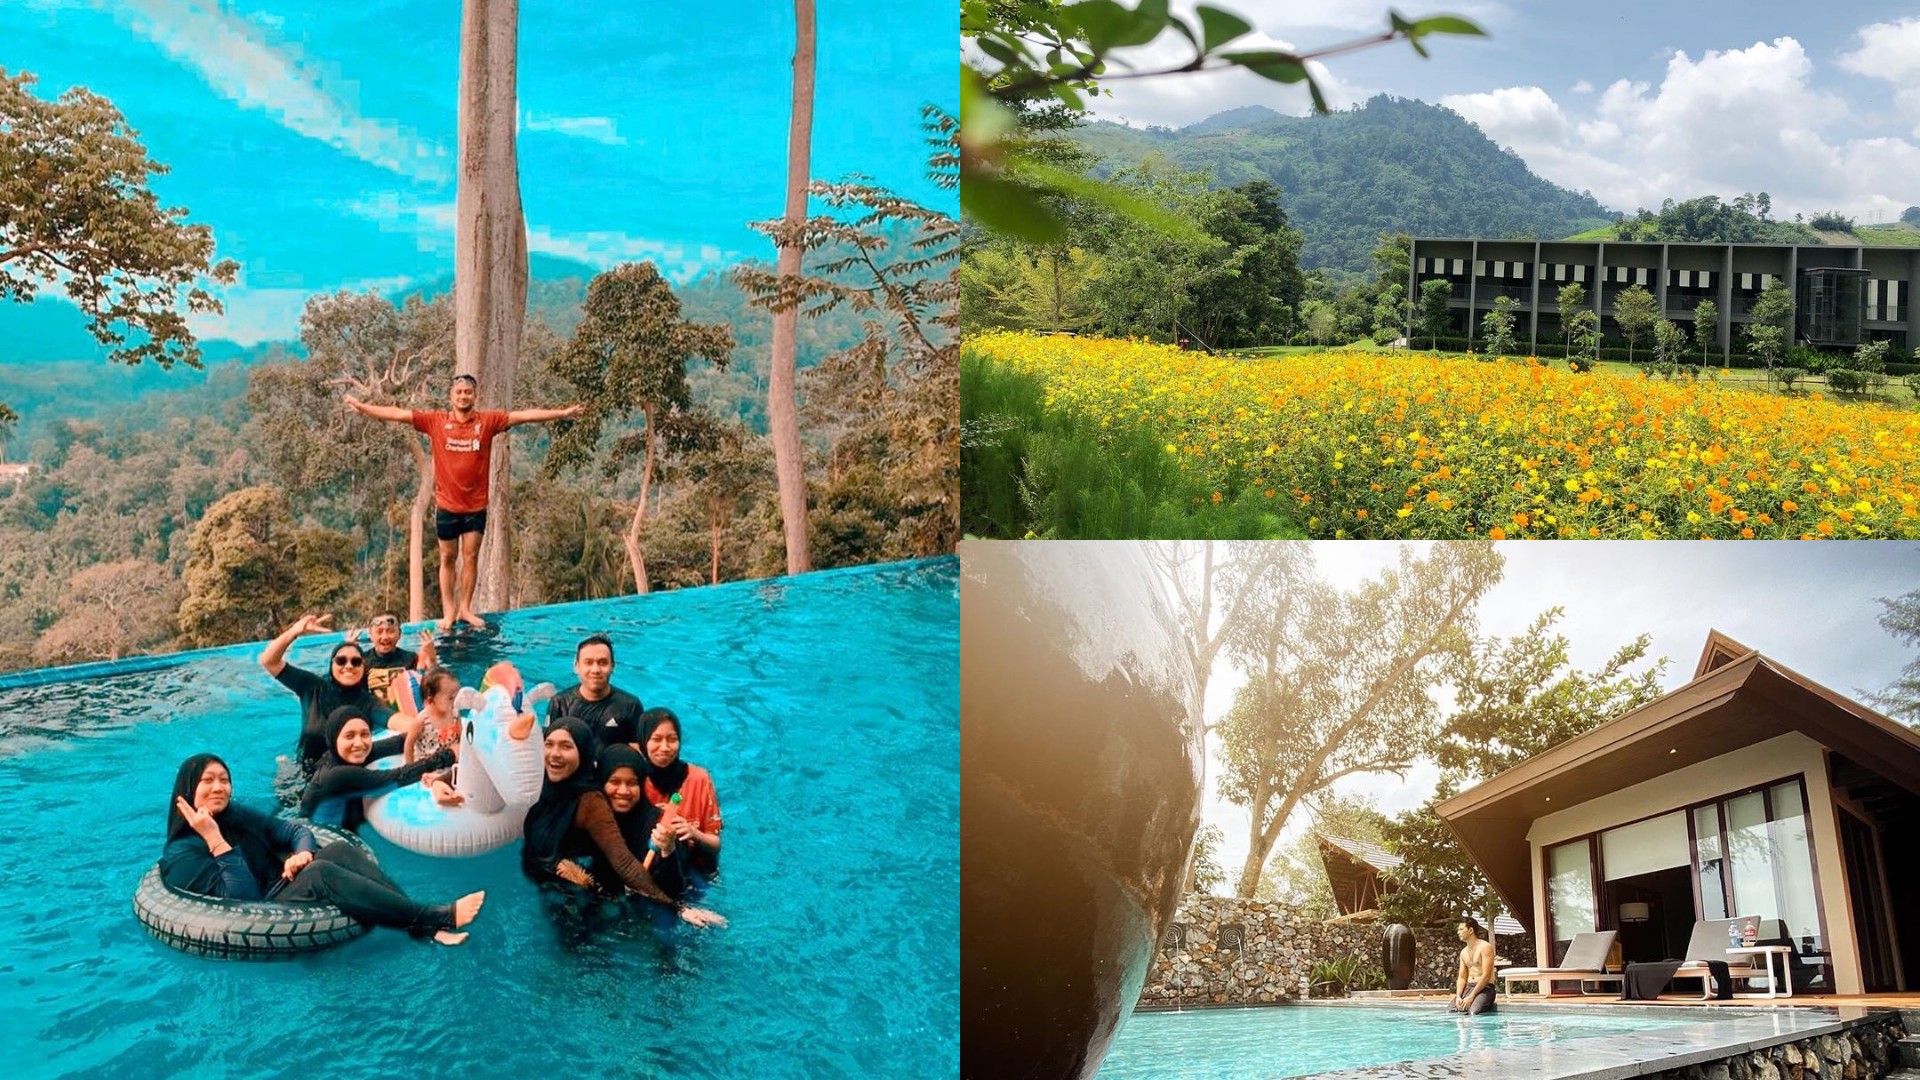 10 Charming Villas And Nature Retreats Near Kl For Getaways With Friends Or Family Klook Travel Blogklook Travel